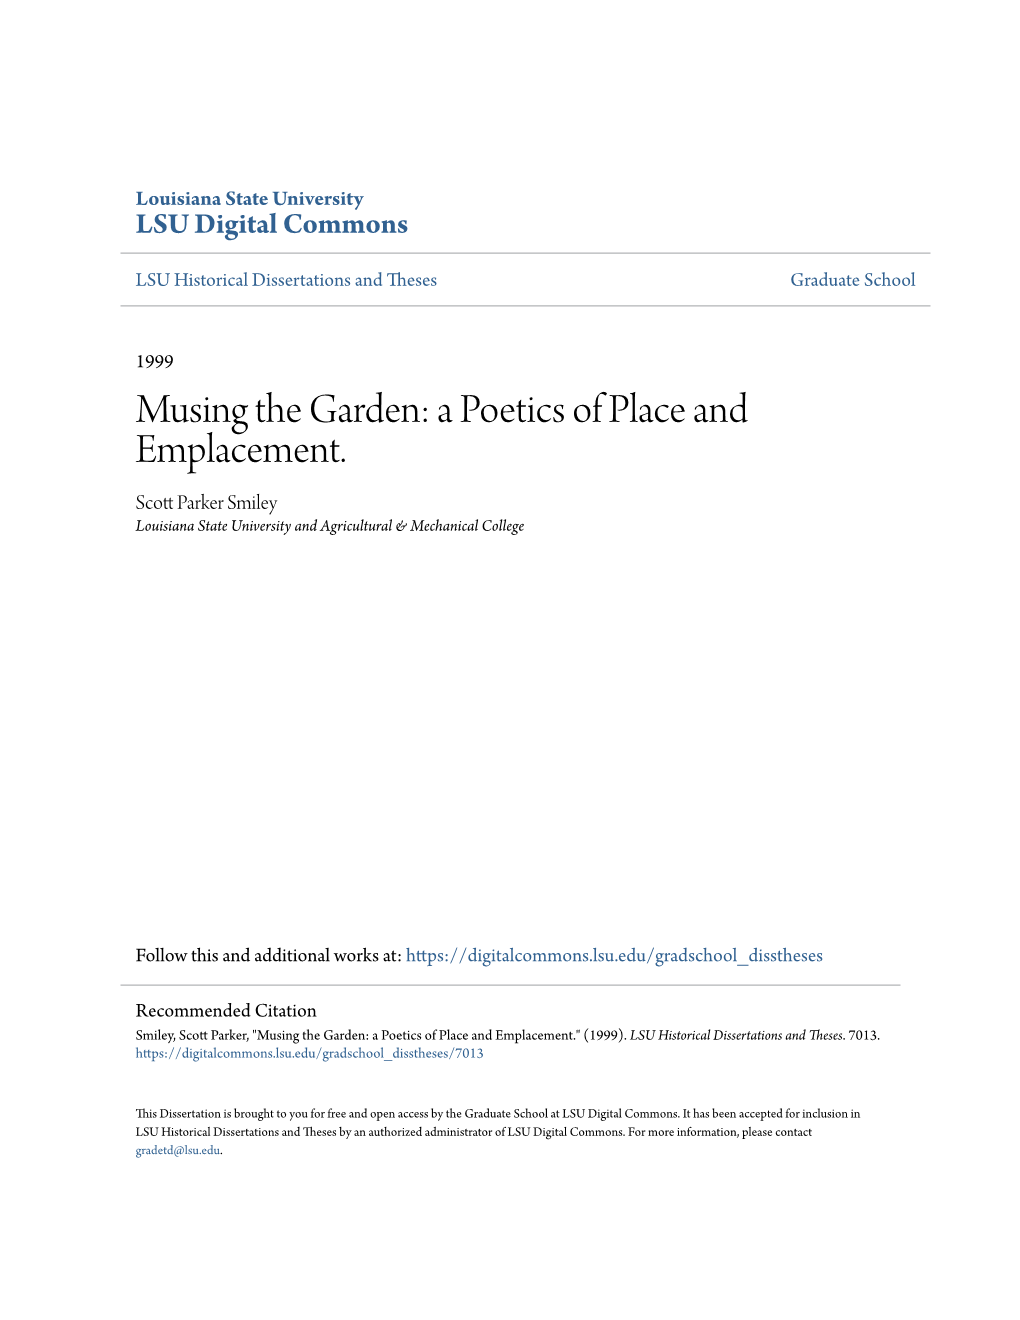 Musing the Garden: a Poetics of Place and Emplacement